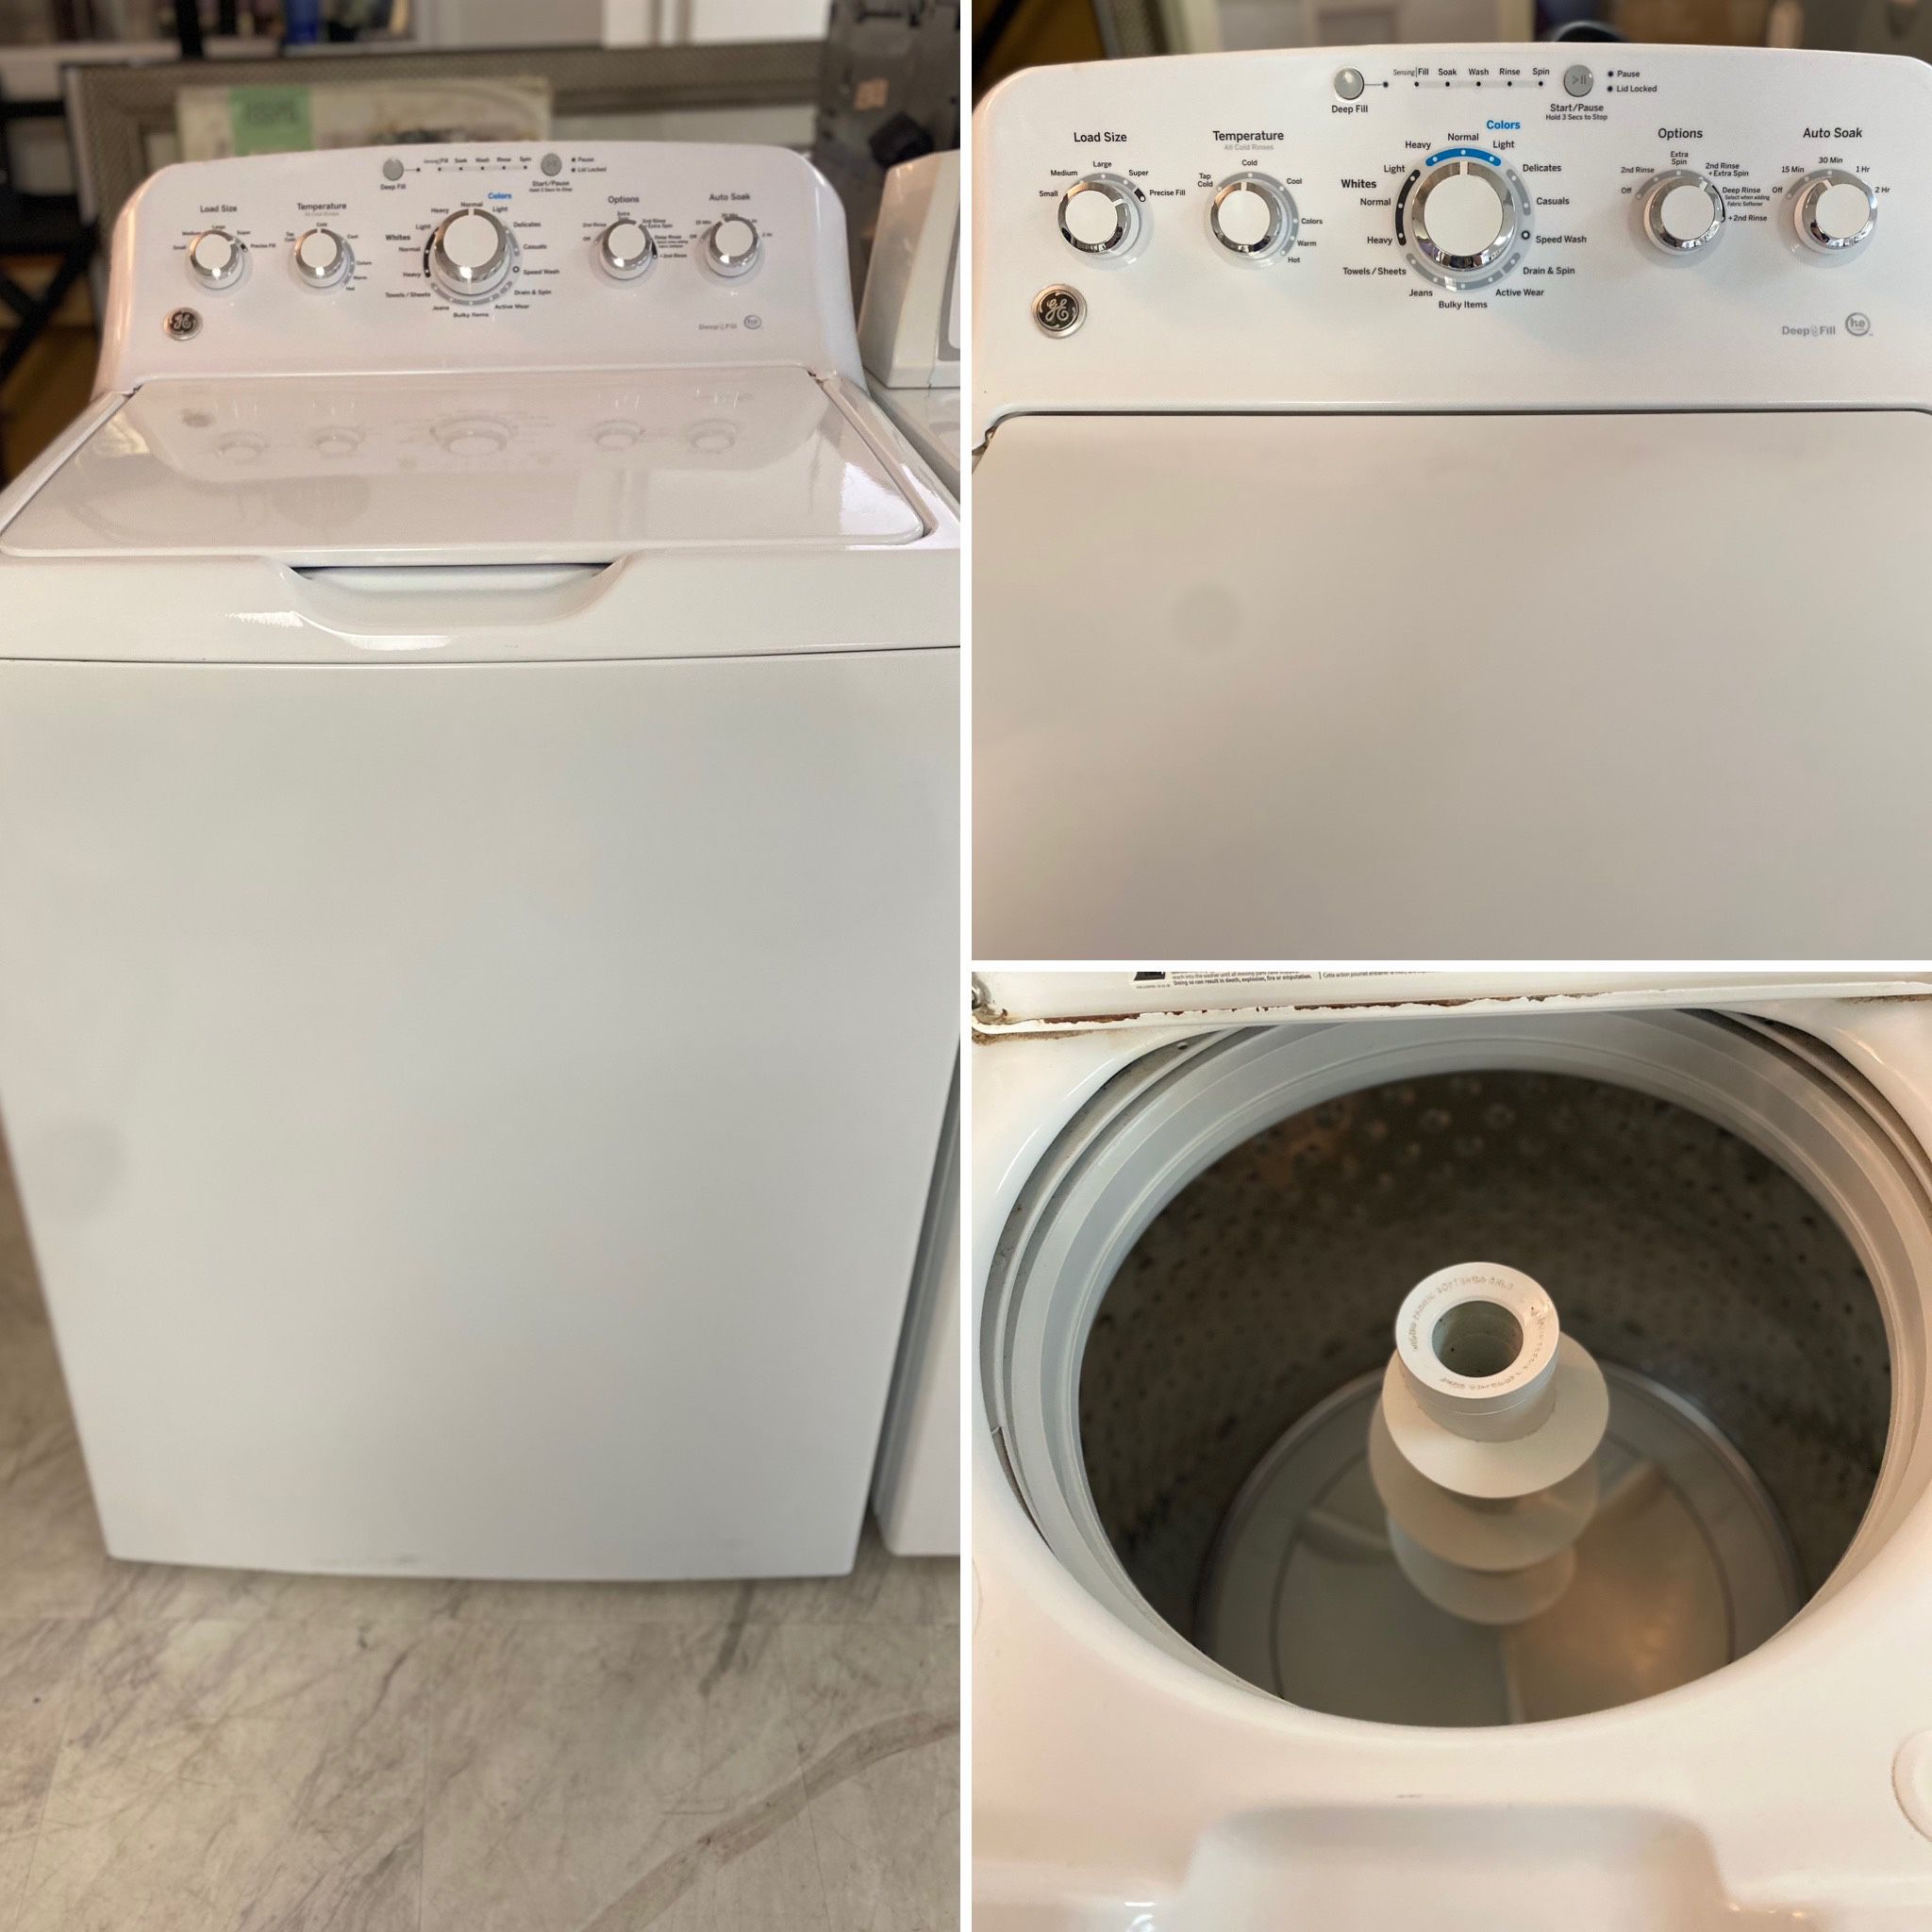 General Electric Deep Fill Washer $169.99